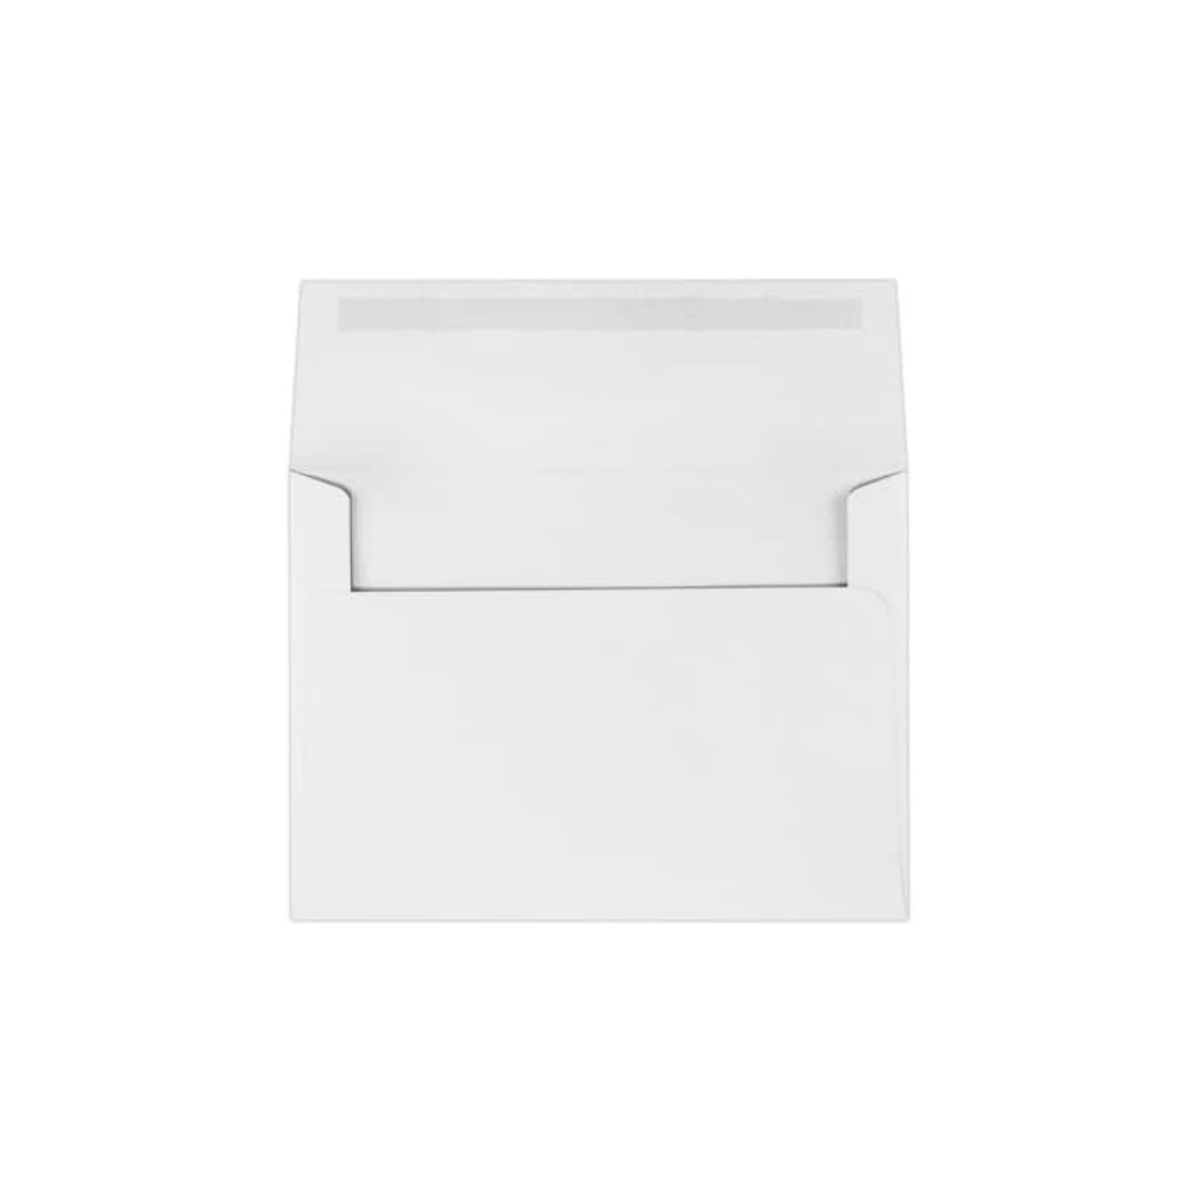 1000 Pack of A7 Envelopes - 70lb Premium Opaque Text for Professional, Secure, and Large Scale Mailing Needs - Perfect for Businesses, Invitations and Personal Use